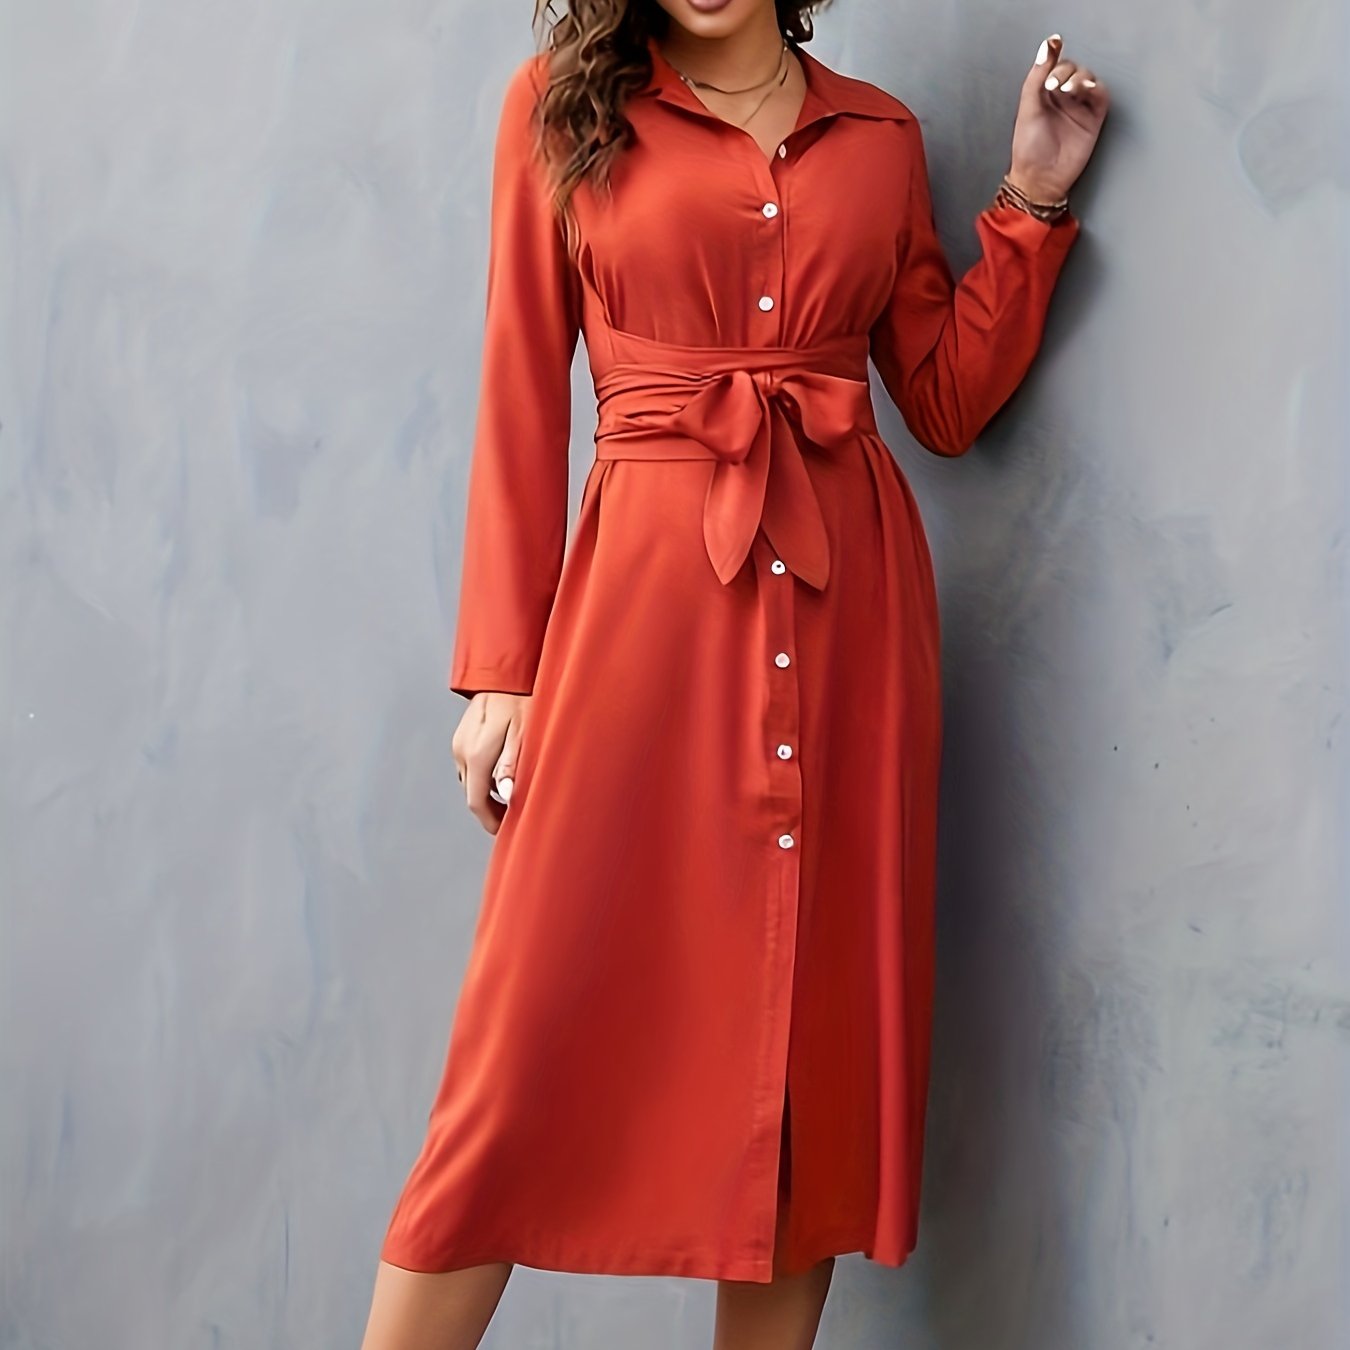 Solid Button Front Belted Dress, Elegant Long Sleeve Slim Dress, Women's Clothing